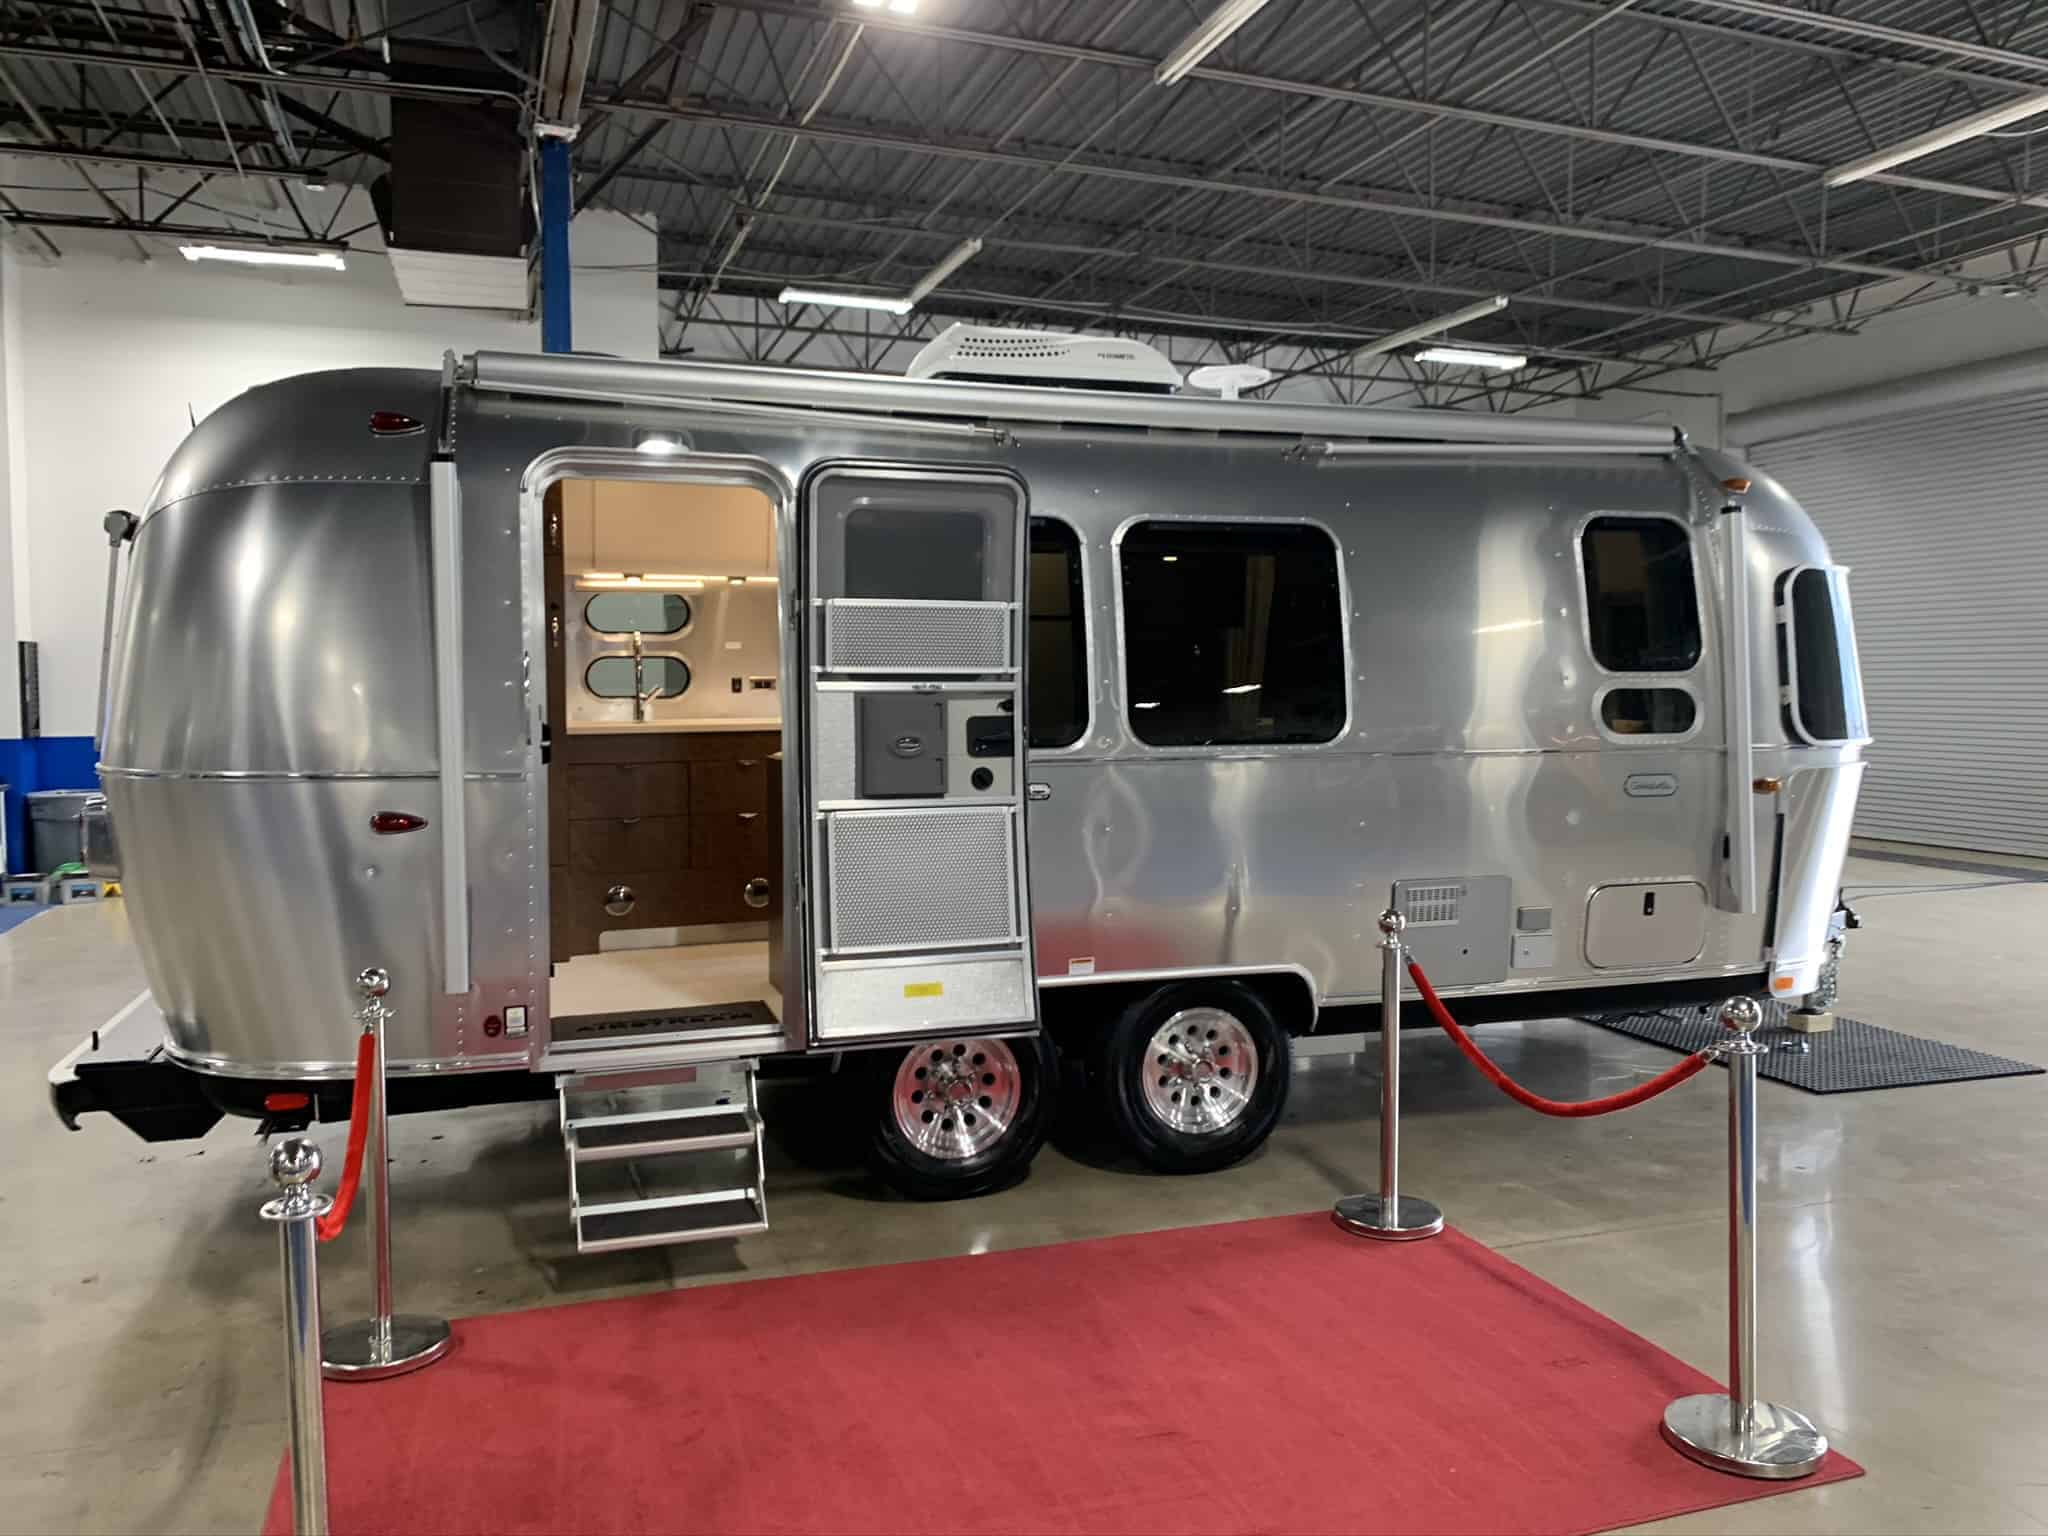 2020 Airstream 23FT Globe Trotter For Sale in Fredericksburg Used Airstream Globetrotter 23 Twin For Sale